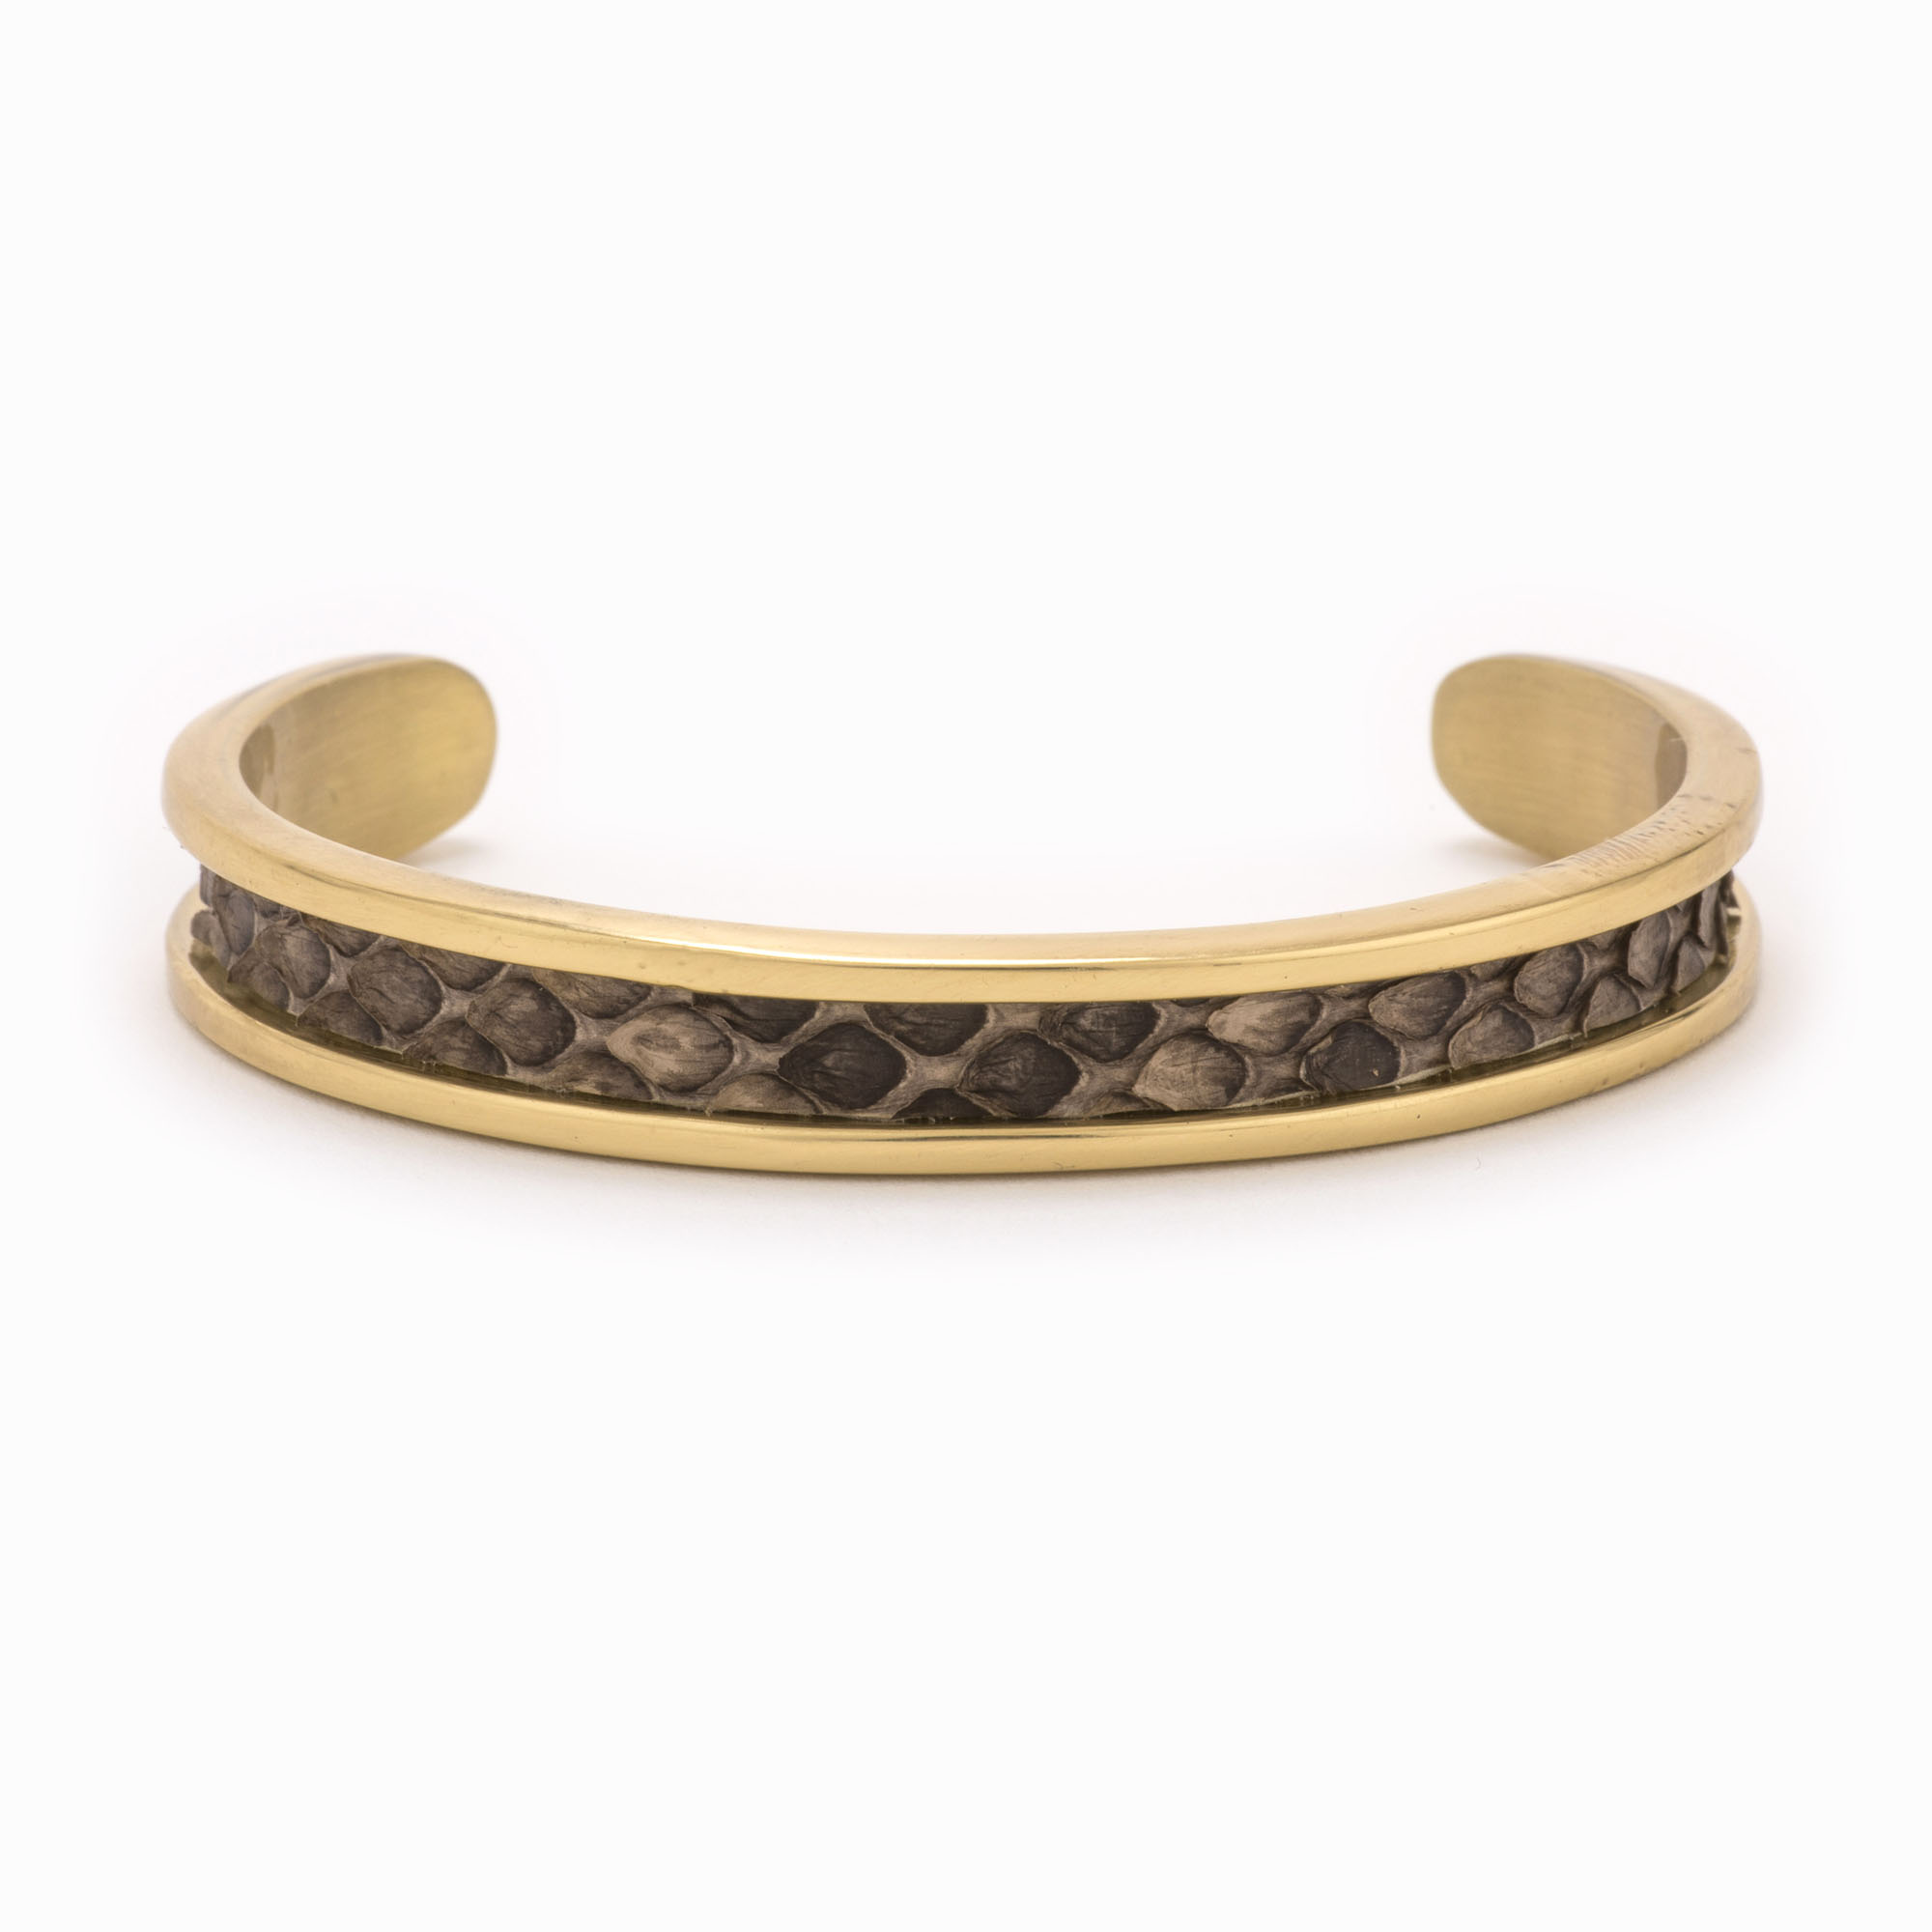 Small gold cuff and with a brown and grey snakeskin pattern.